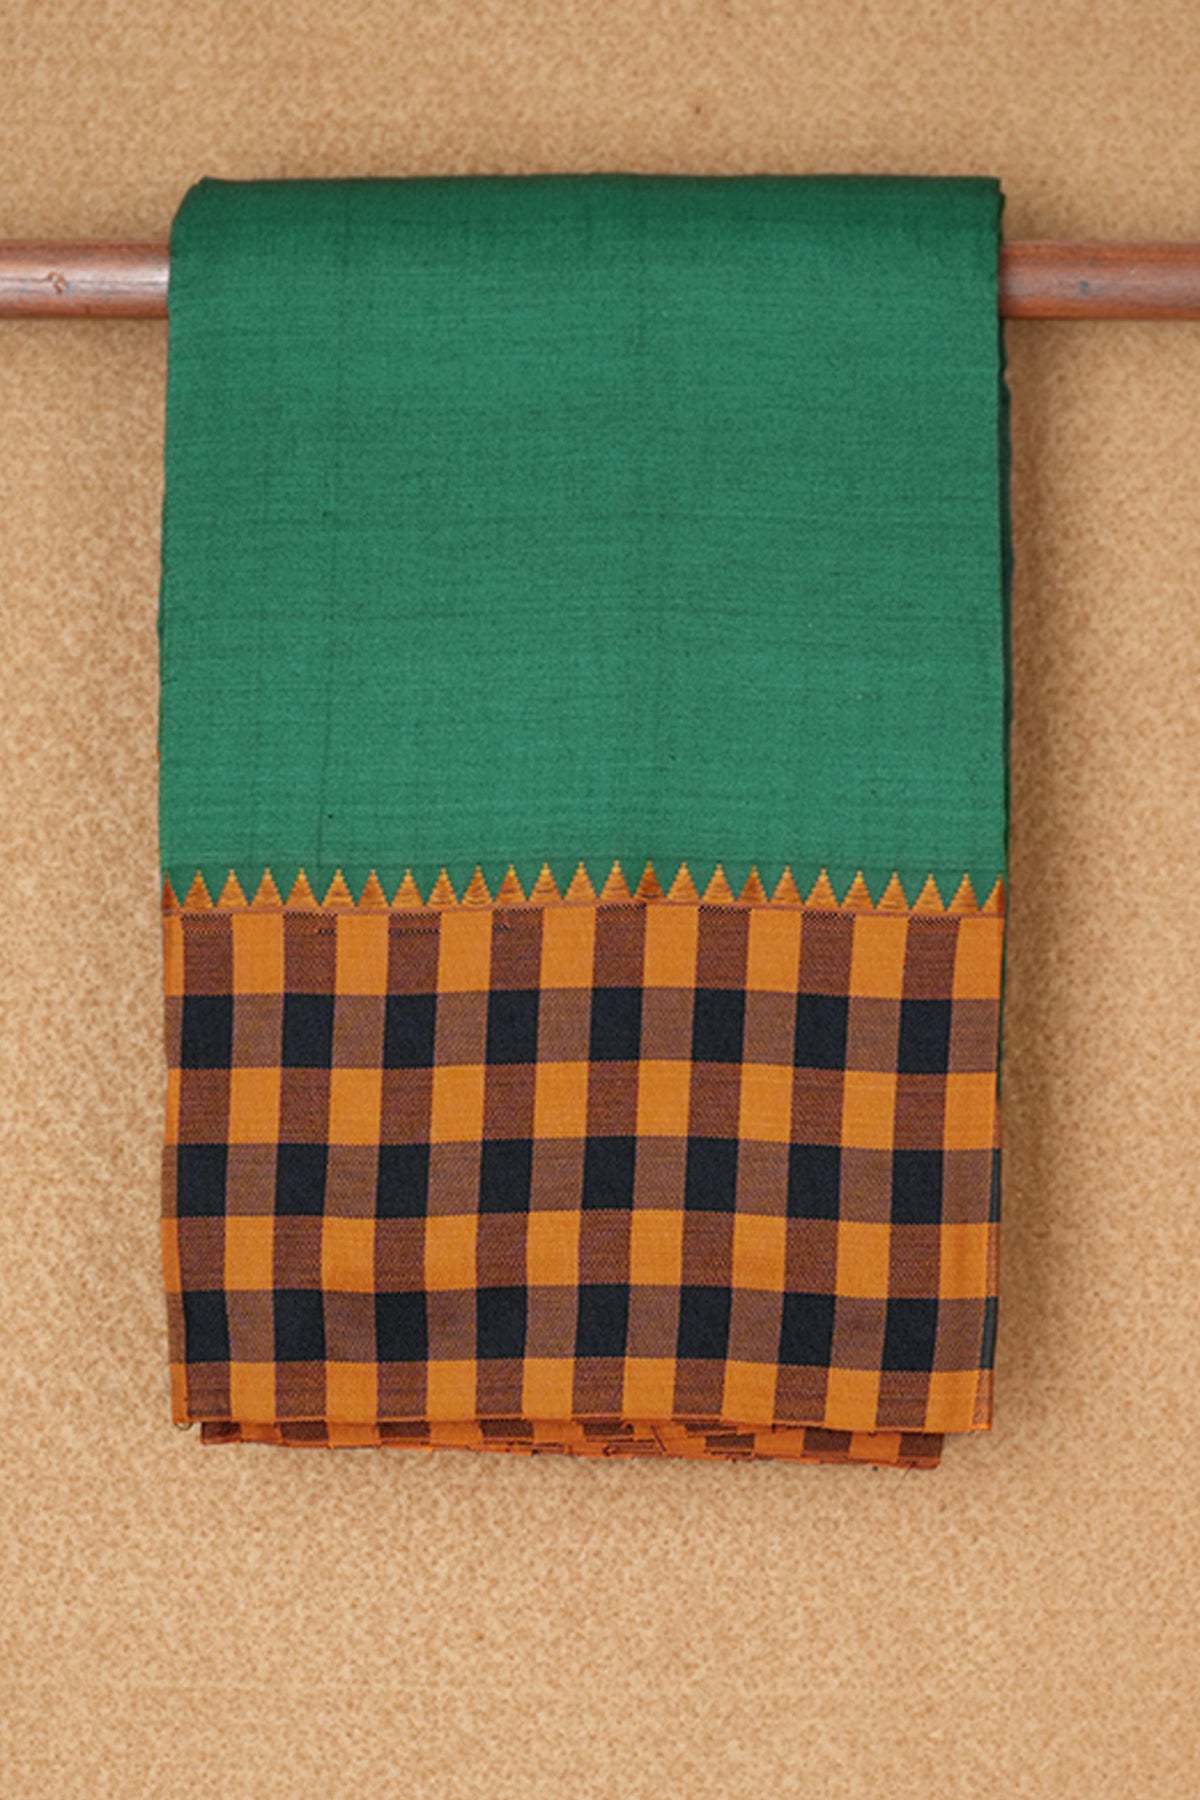 Checked Border Forest Green Dharwad Cotton Saree